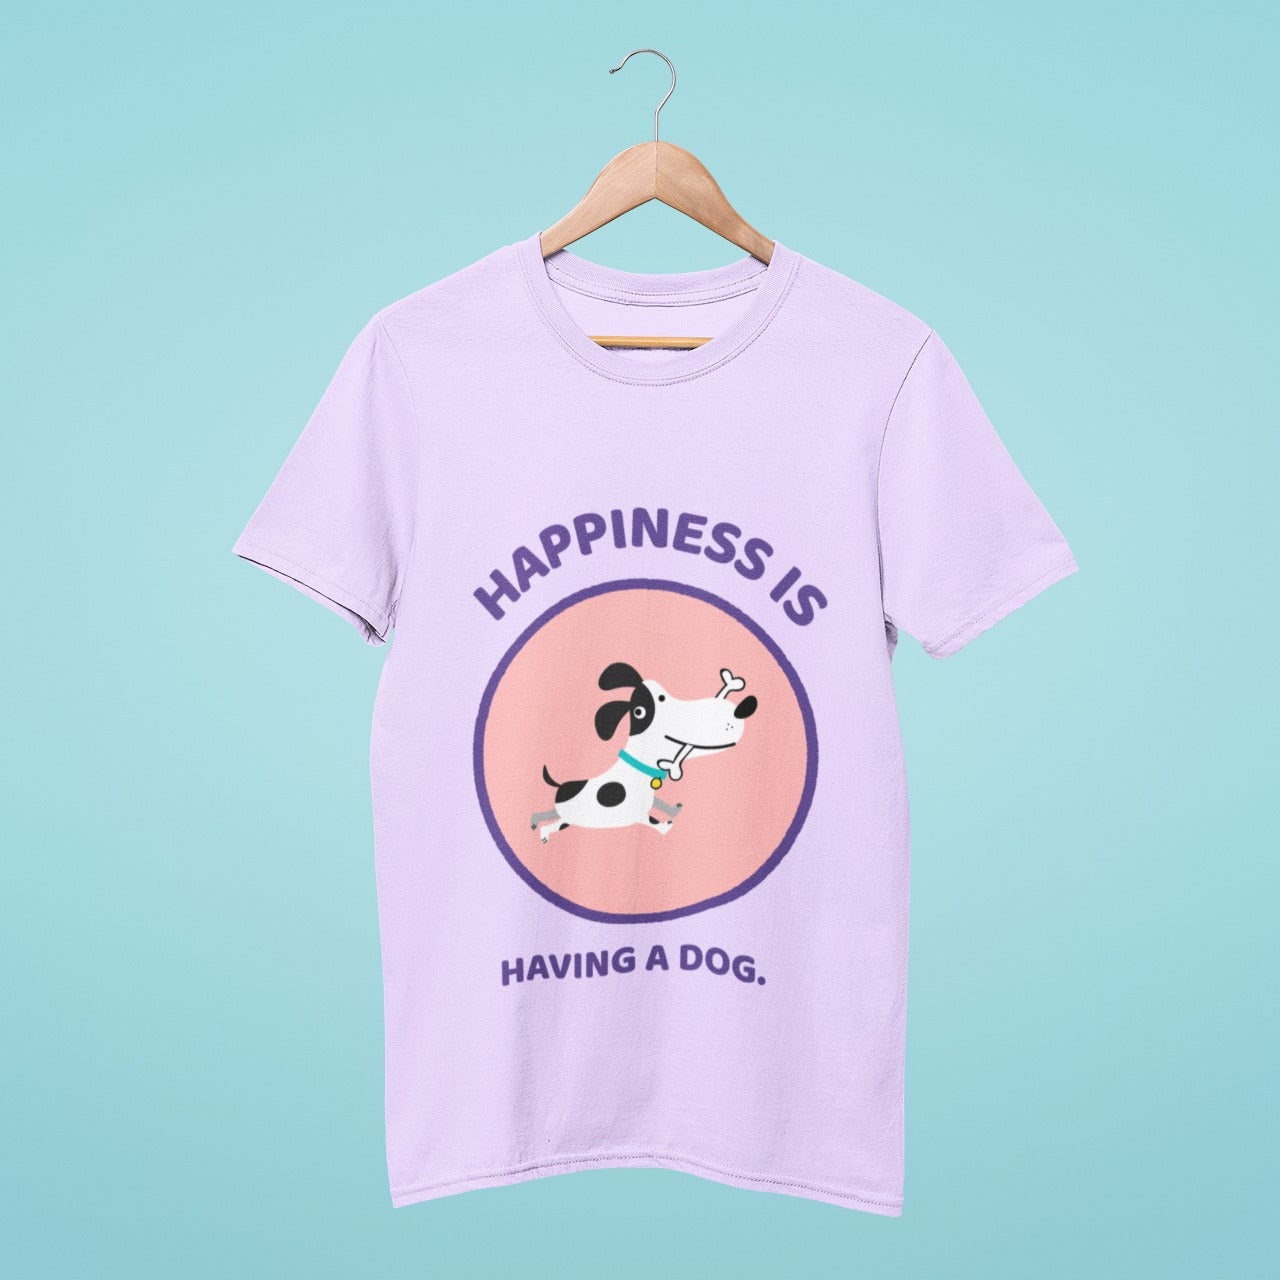 This lavender t-shirt with the title "Happiness is Having a Dog!" and a charming graphic of a cartoon dog running with a bone in its mouth is perfect for any dog lover. Made from high-quality material, this shirt is comfortable and durable. Express your love for your furry friend while staying stylish and comfortable in this adorable shirt. Order yours today!